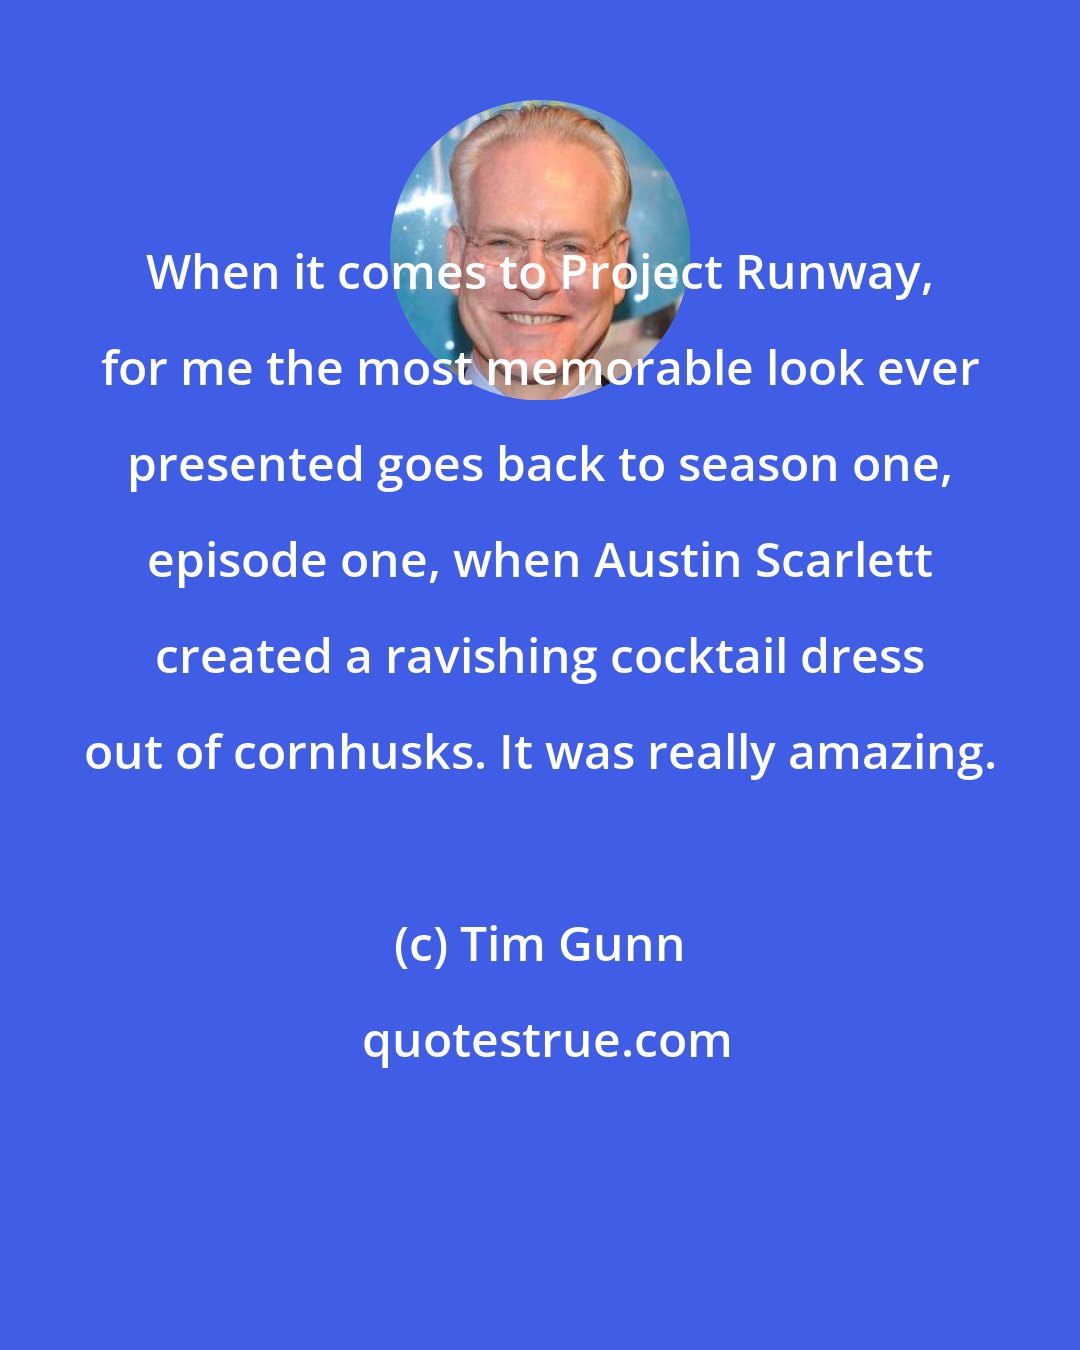 Tim Gunn: When it comes to Project Runway, for me the most memorable look ever presented goes back to season one, episode one, when Austin Scarlett created a ravishing cocktail dress out of cornhusks. It was really amazing.